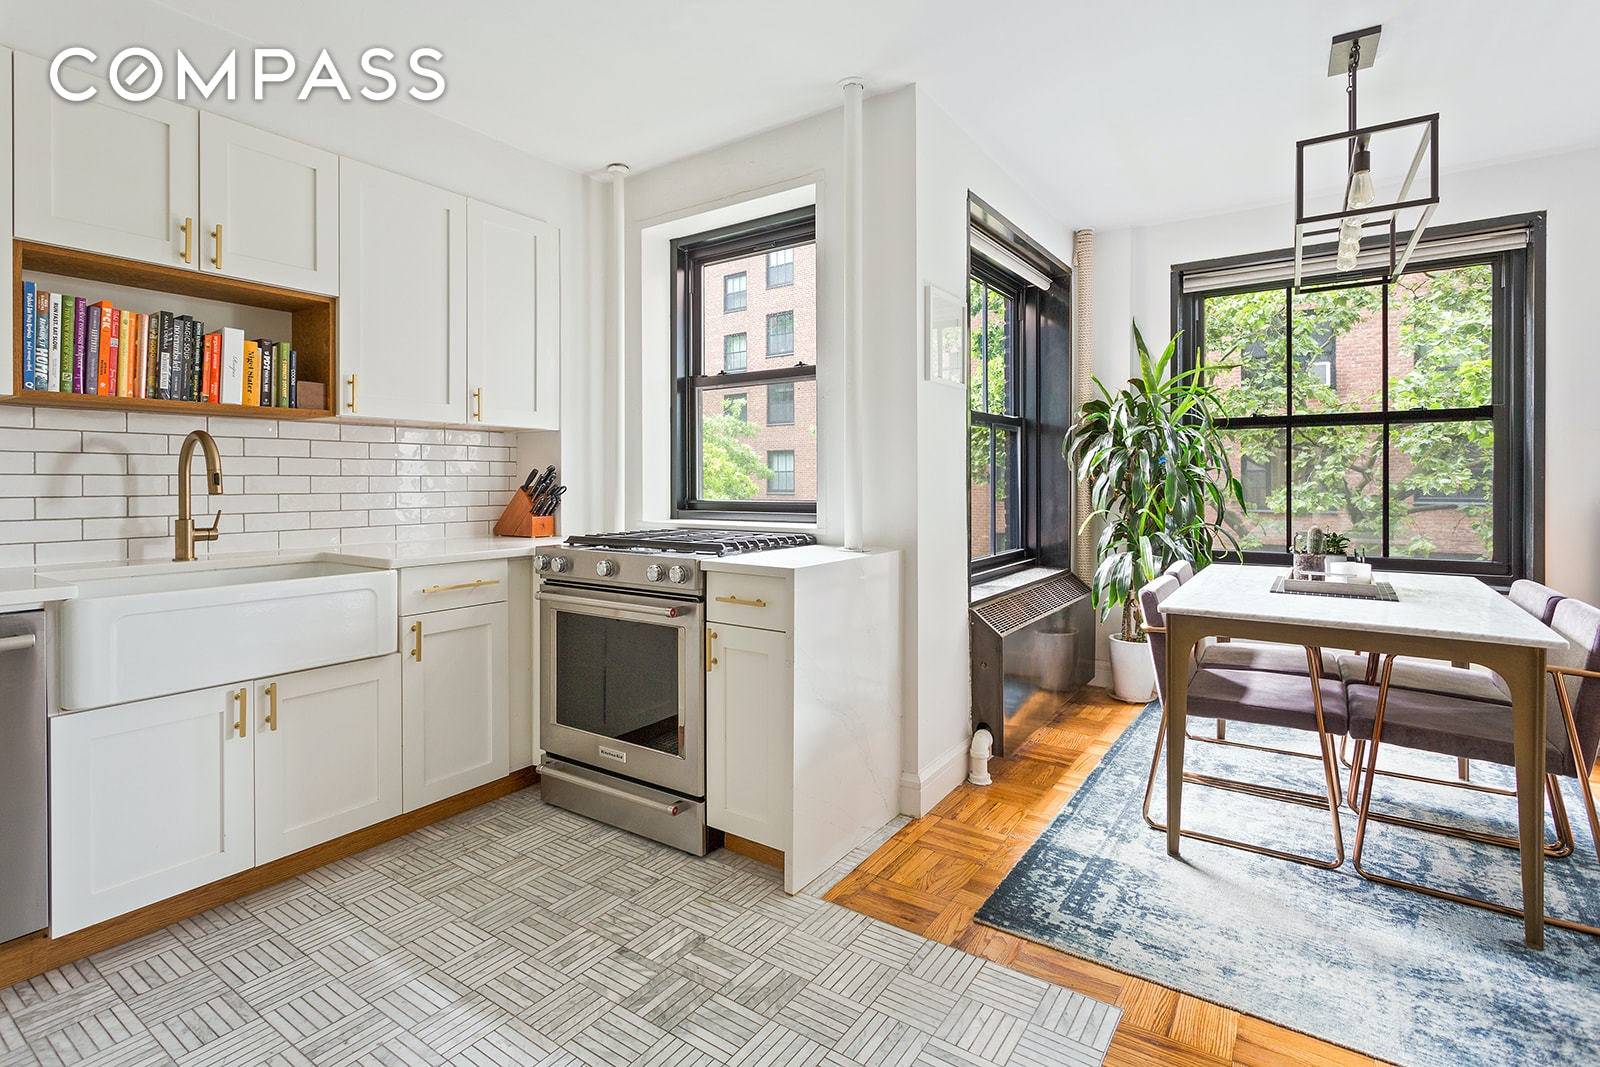 Beautifully renovated 1. 5 bedroom home in the heart of Clinton Hill, Brooklyn.